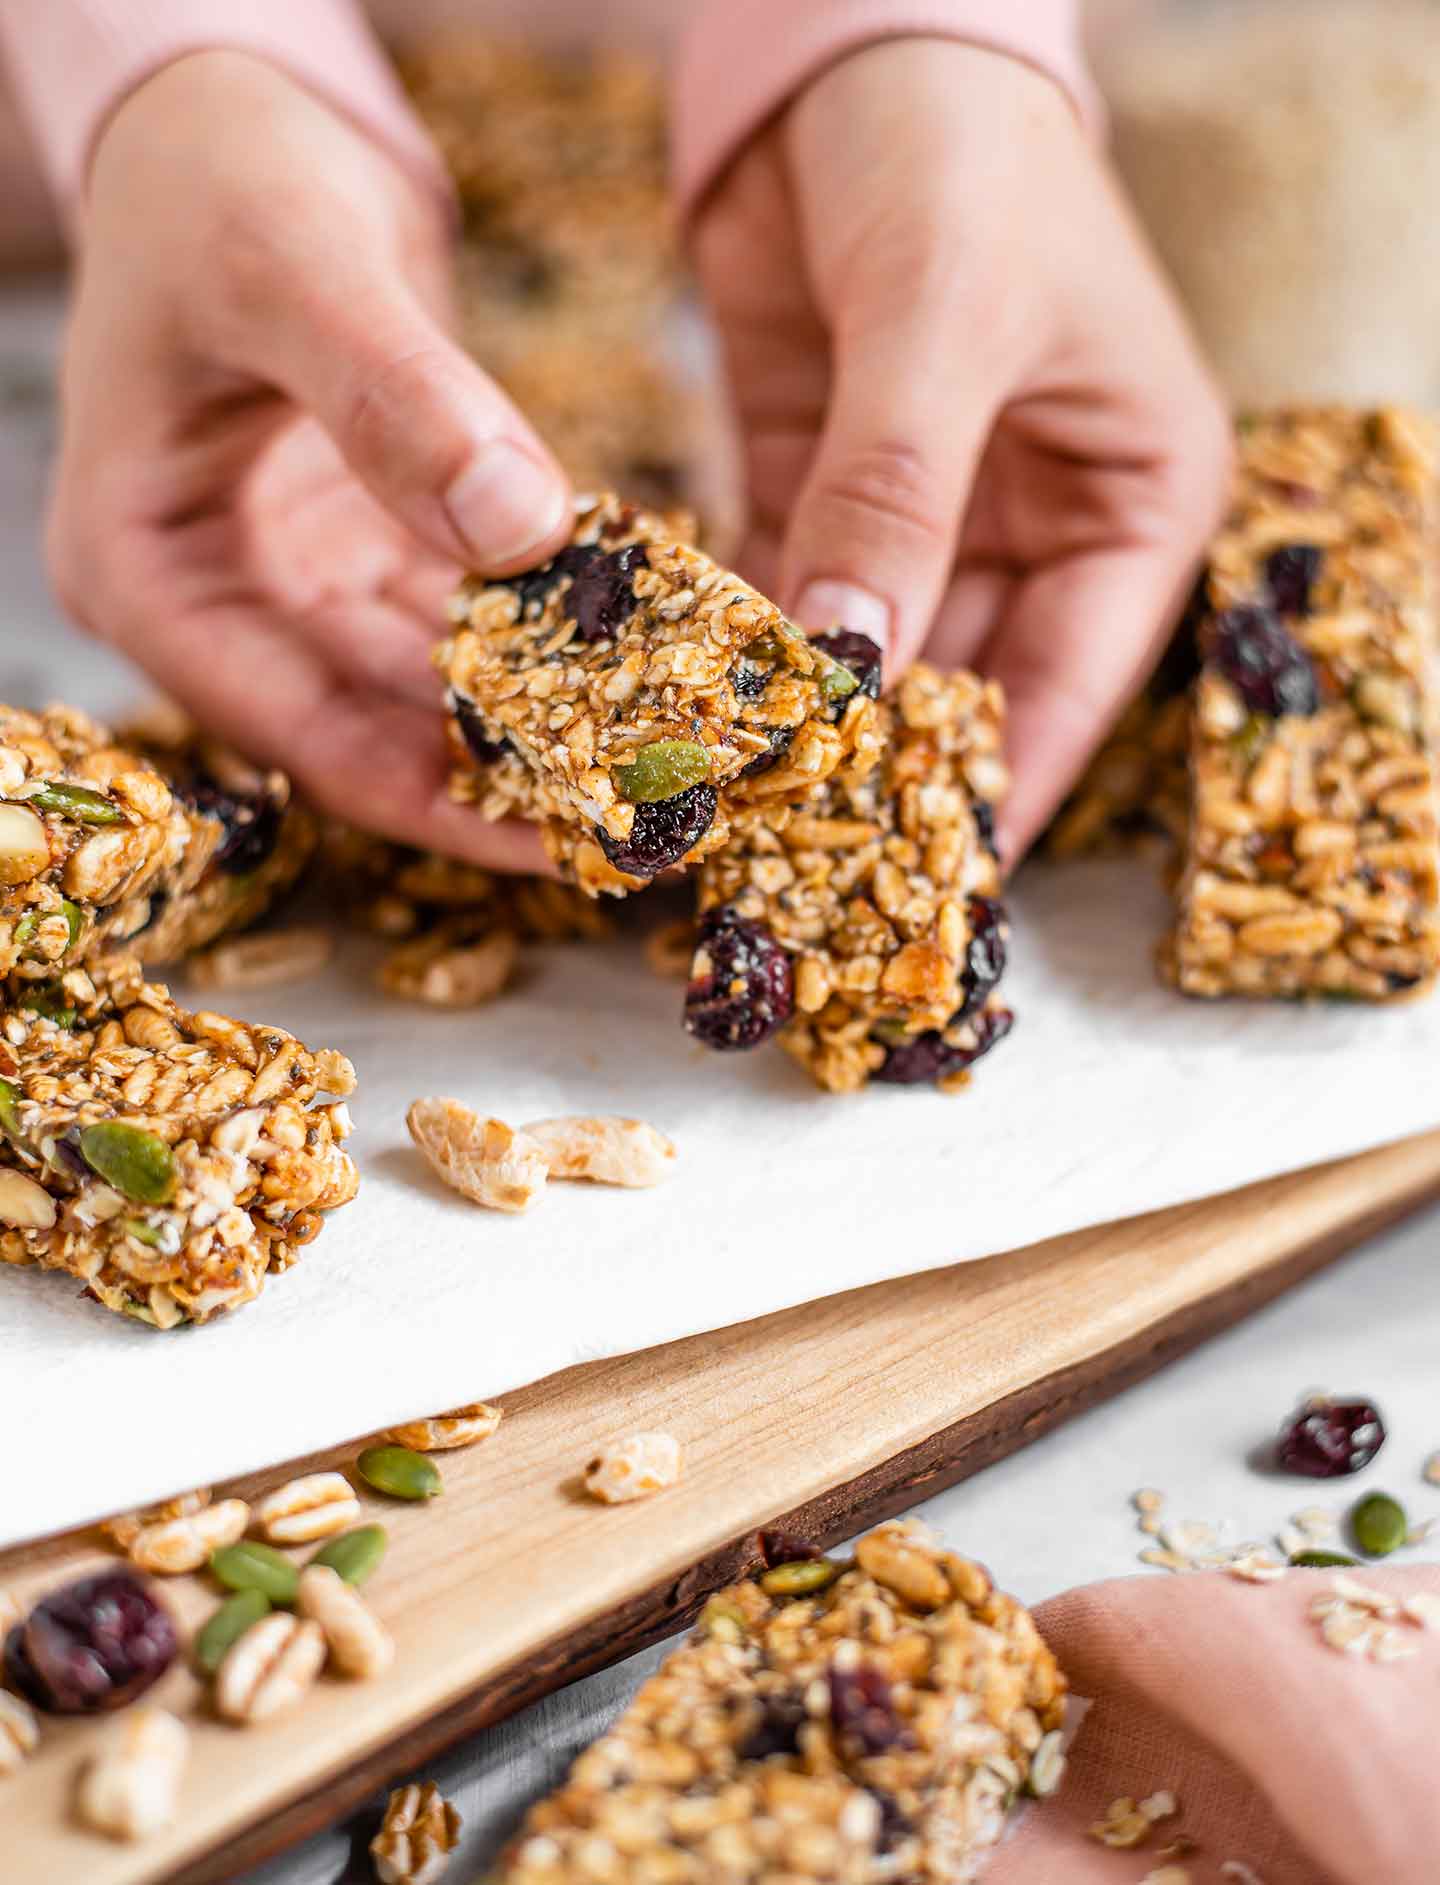 Side view of two hands breaking apart a puffed rice granola bar to show the insides. The granola bars are thick and filled with puffed grains, oats, almonds, and festive pumpkin seeds, and dried cranberries.